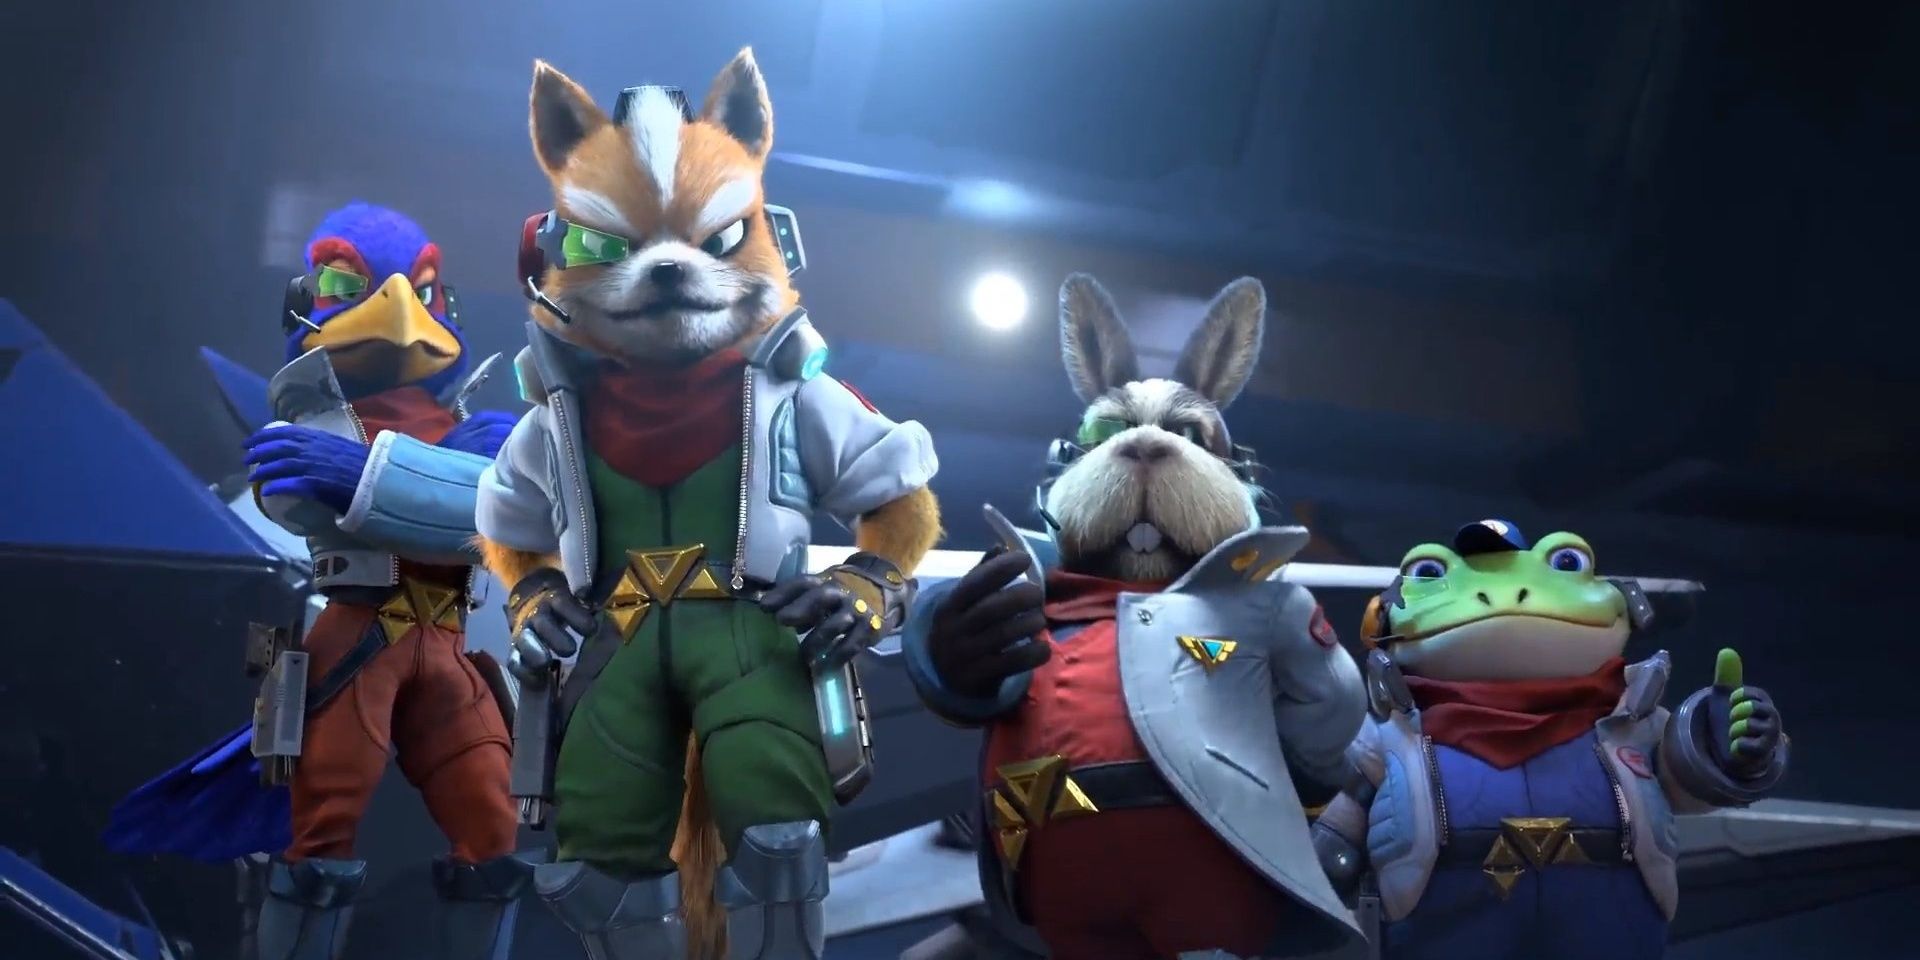 Star Fox Promo Image Of All The Main Characters